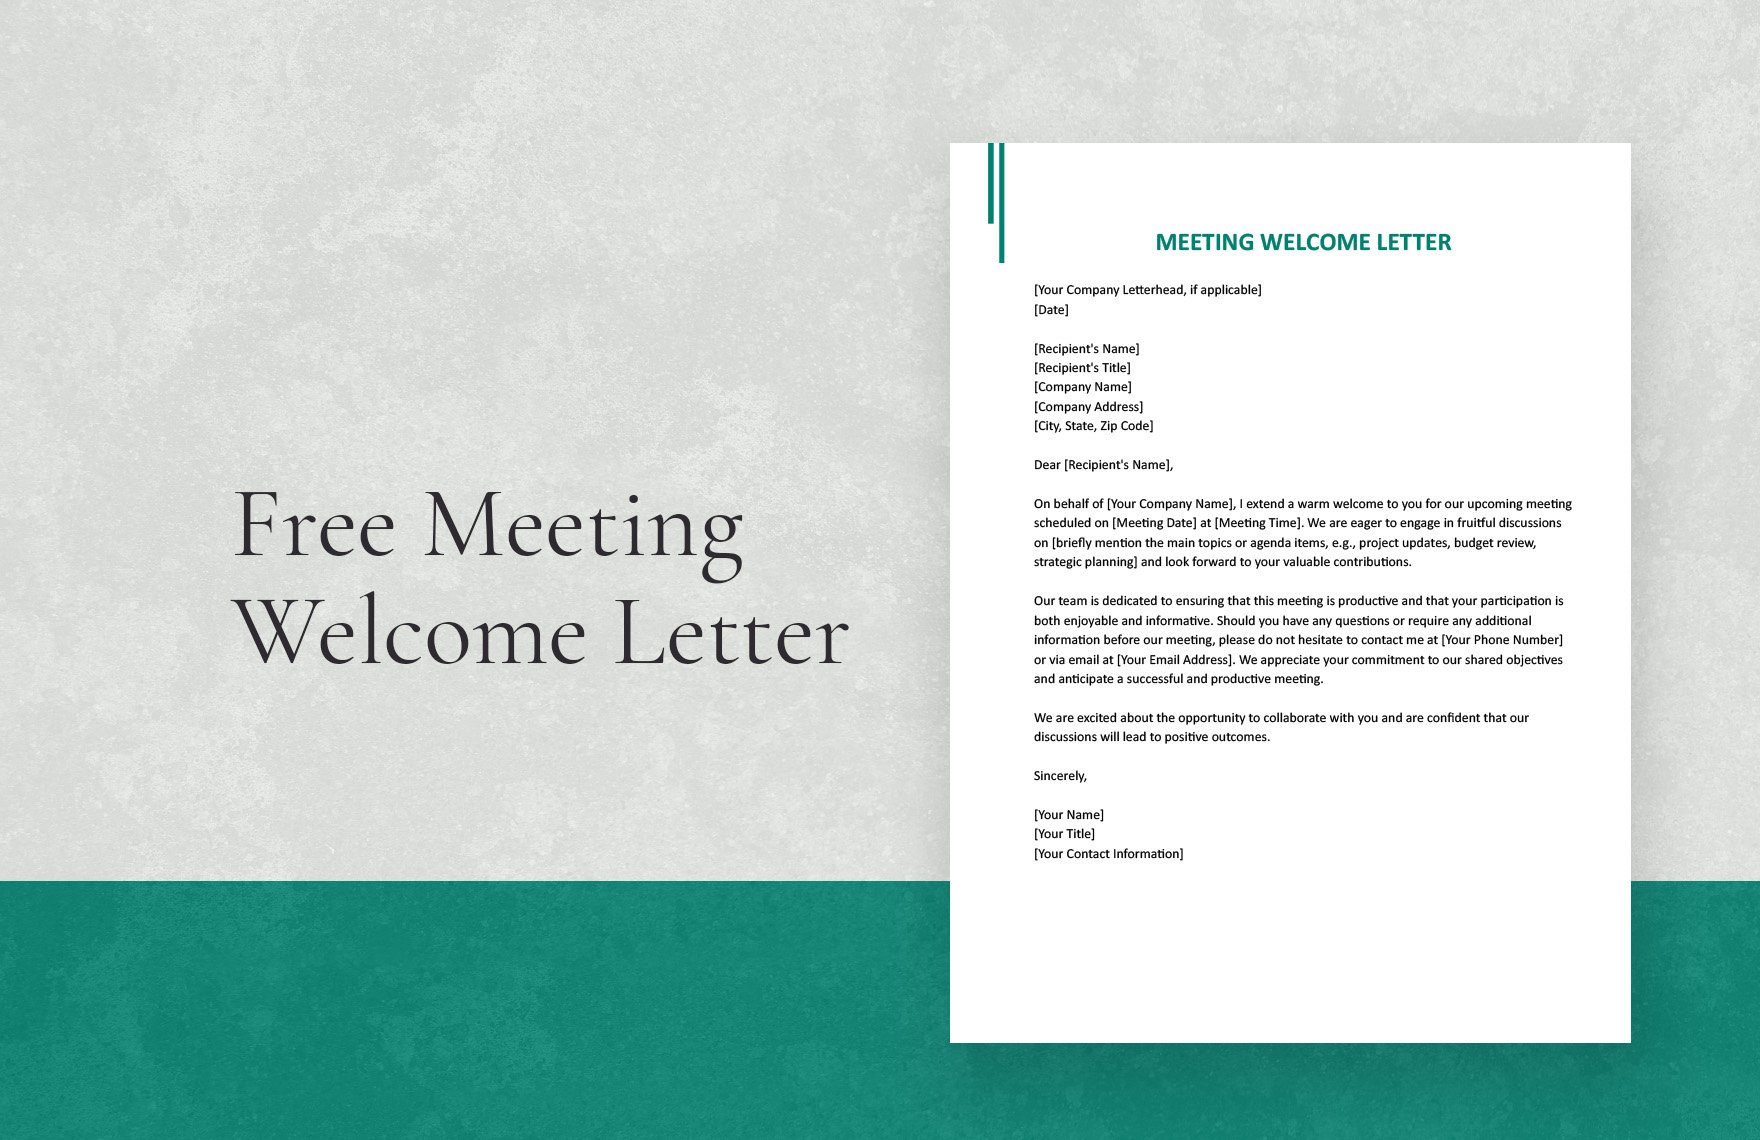 Free Meeting Welcome Letter in Word, Google Docs